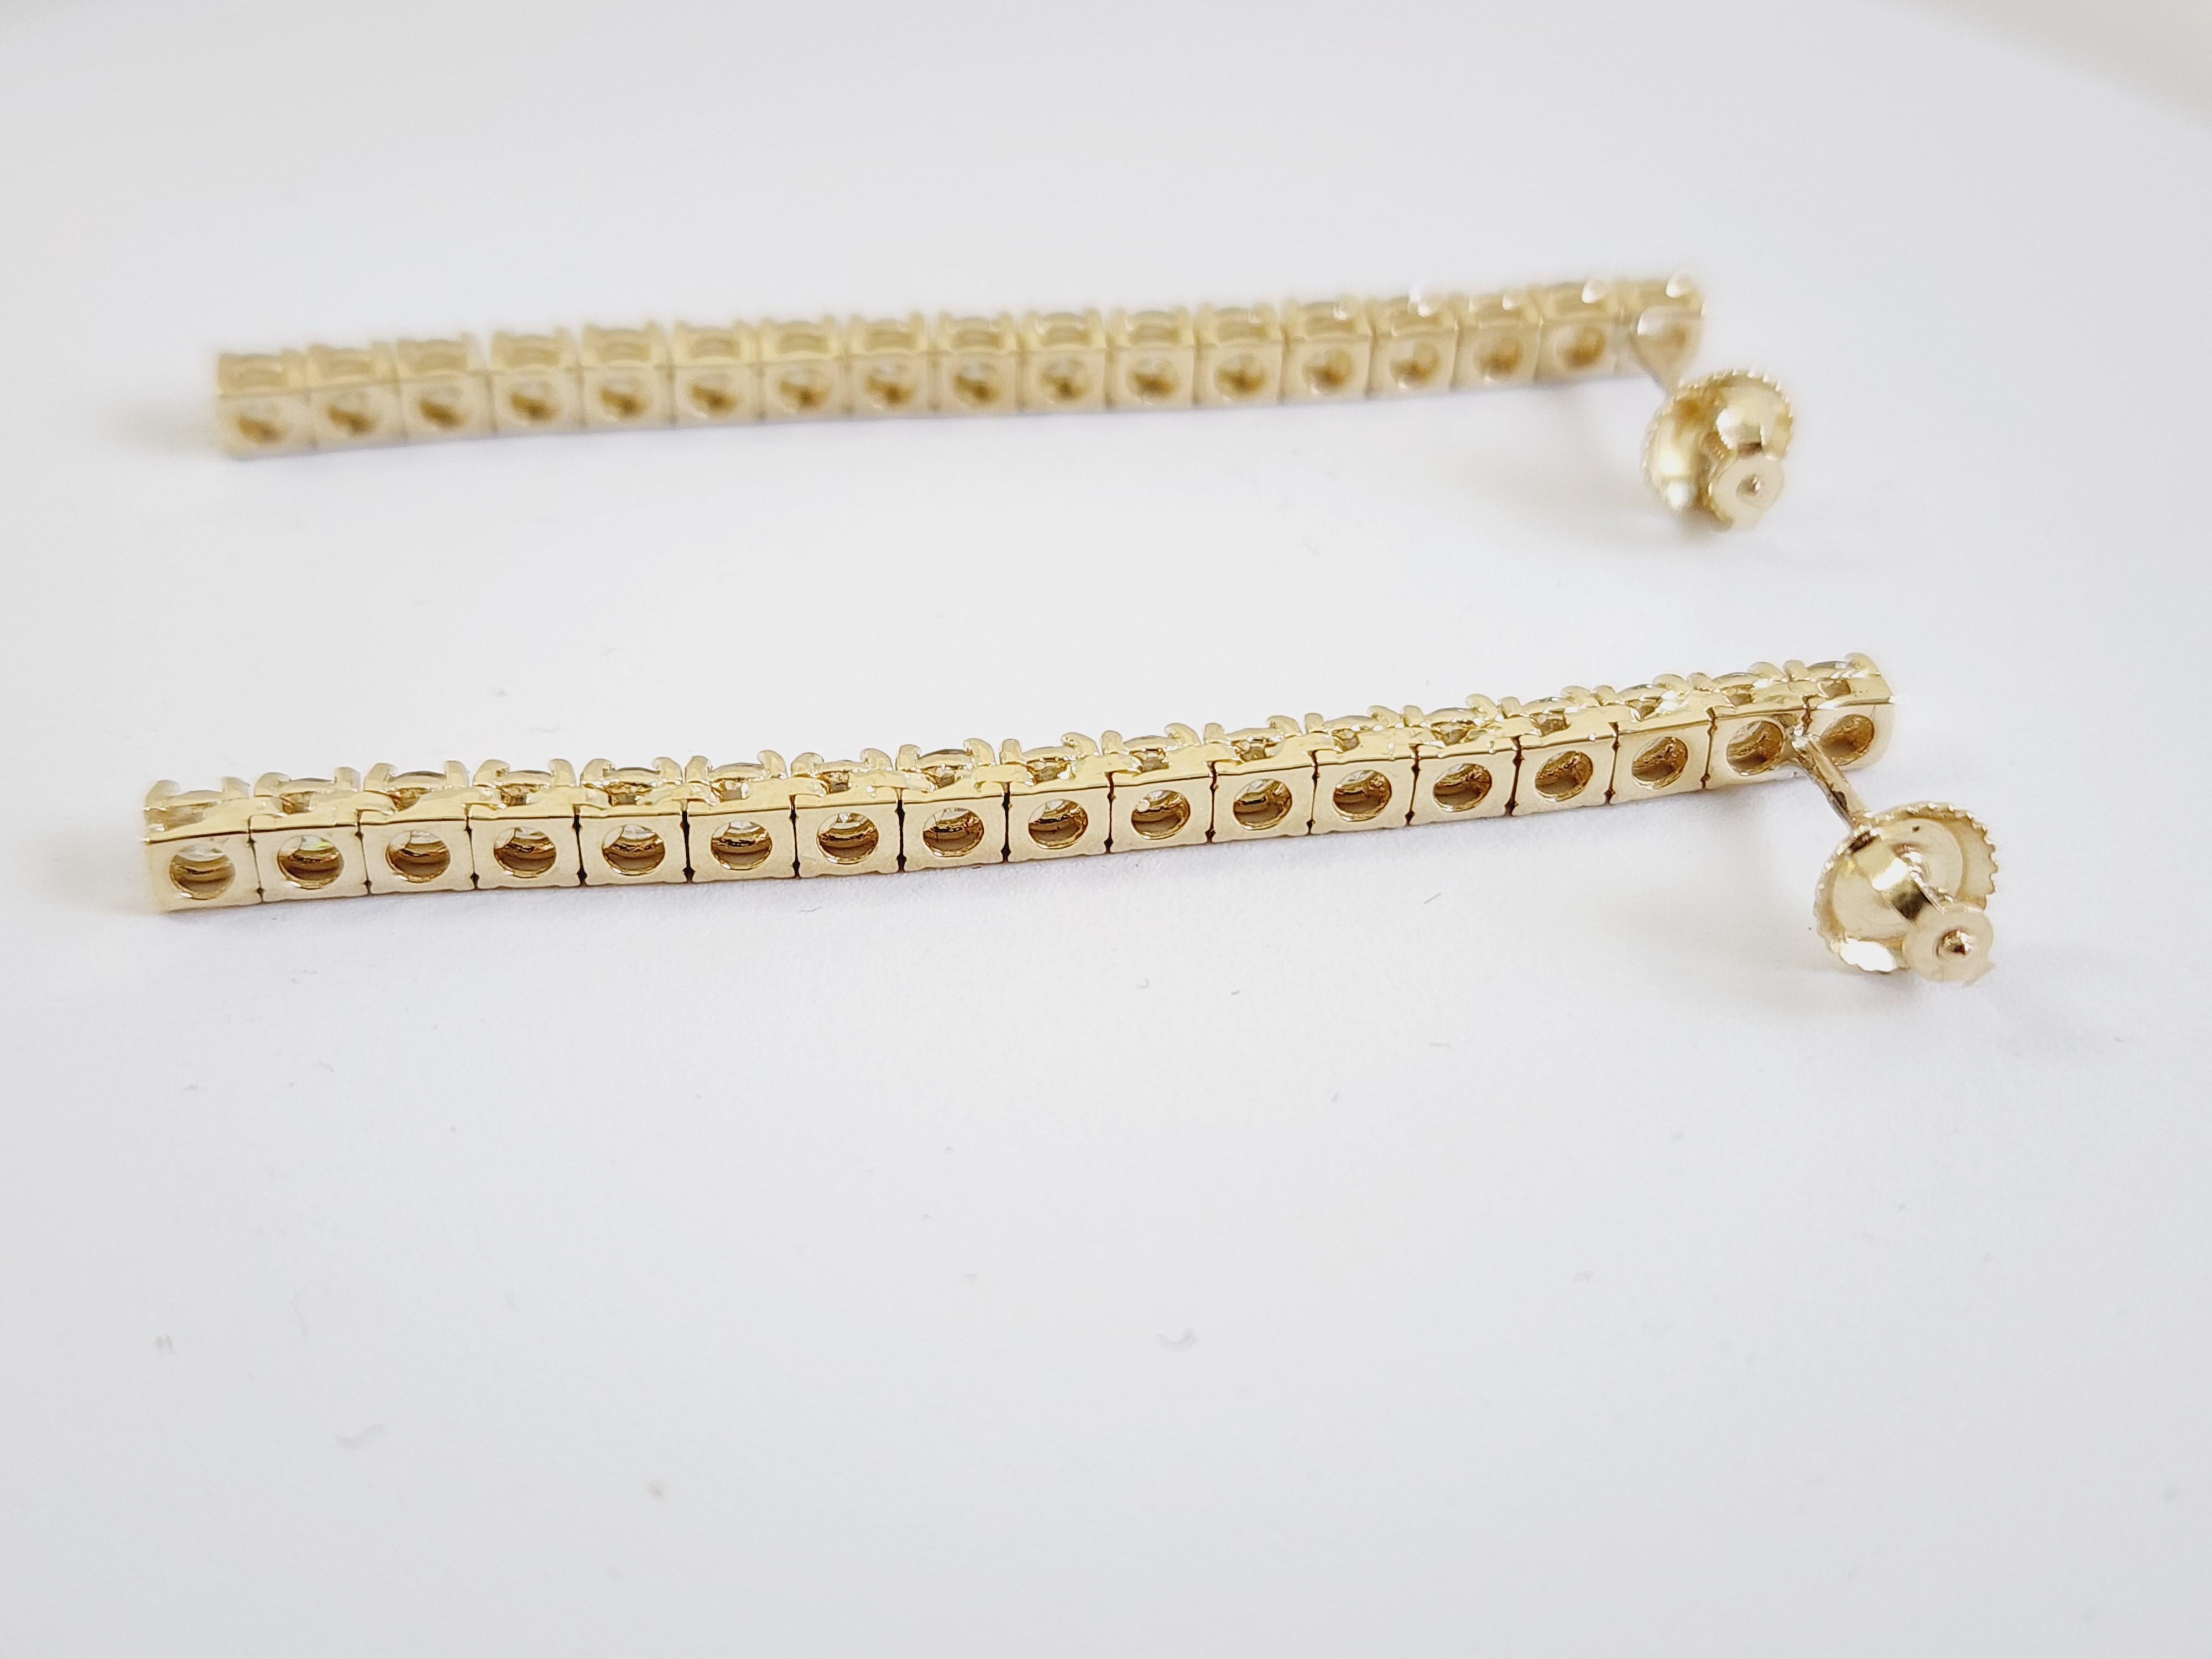 Tennis Earrings Italian made 14K yellow gold.
The total weight is 3.07 carats. Beautiful shiny natural diamonds.
The total length is 2 inch drop. screw back setting for secure wear.

*Free shipping within the U.S.*